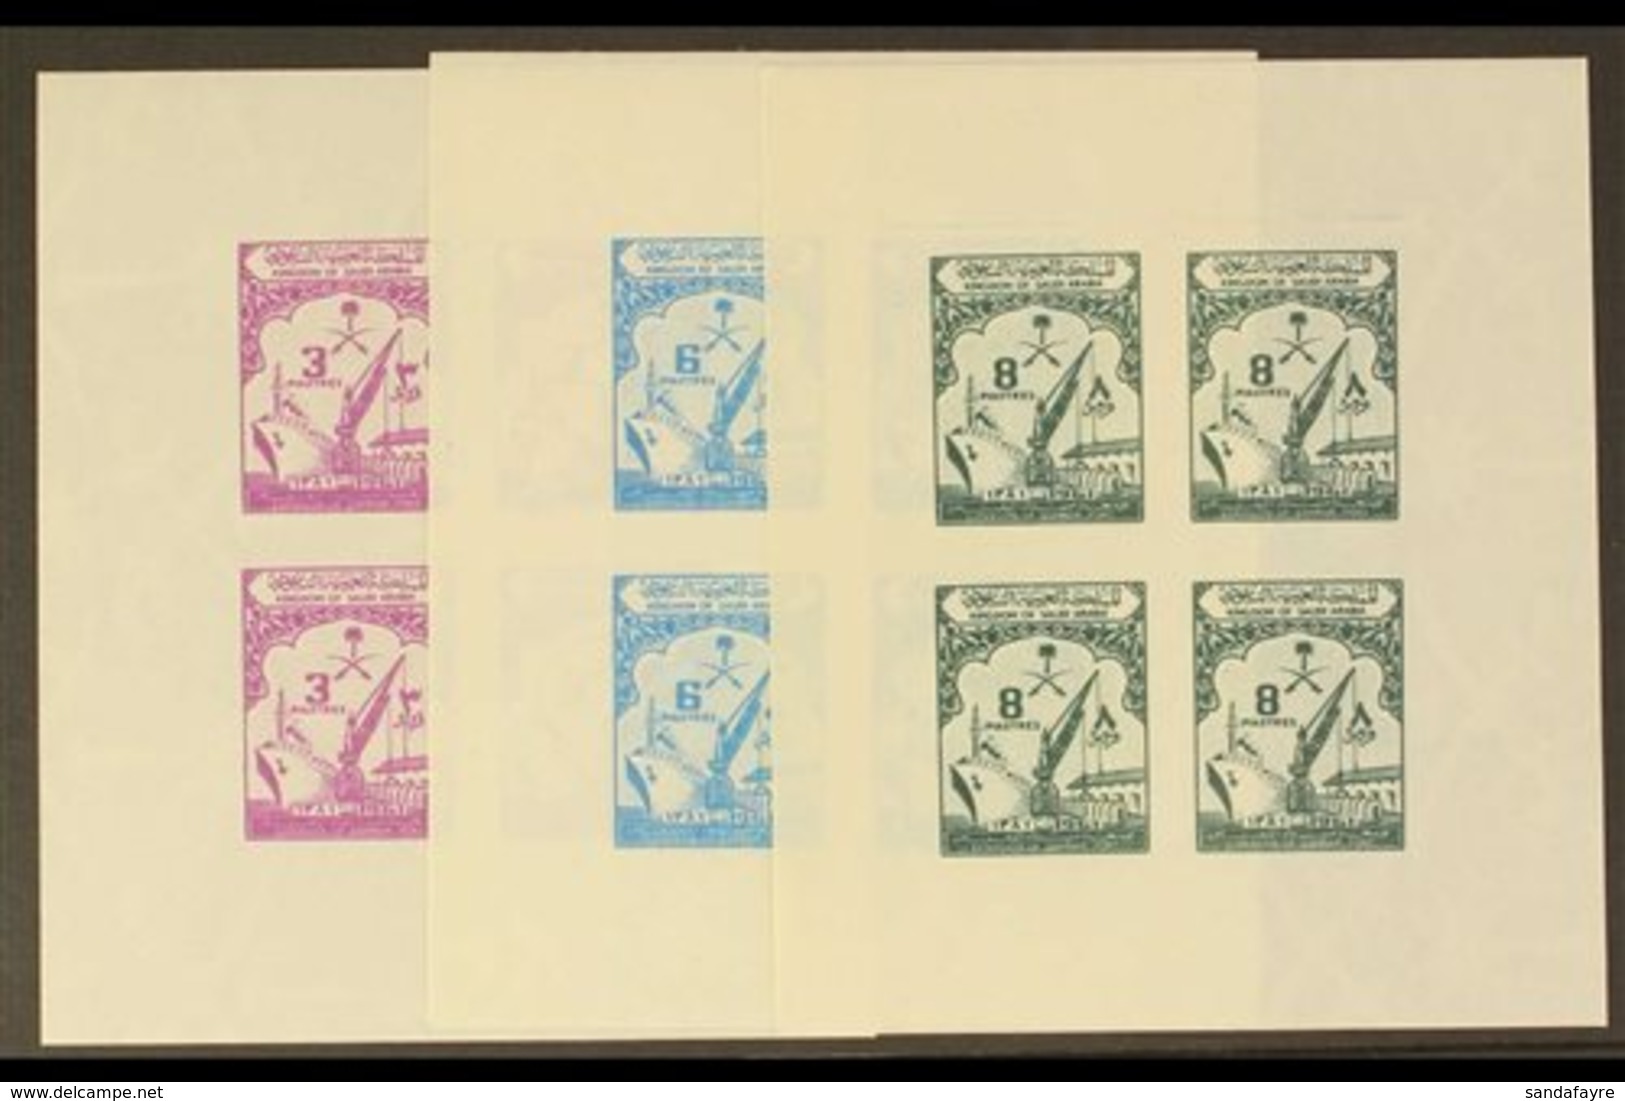 1961 1961 Opening Of Dammam Port Extension Set Of Three As IMPERFORATE MINIATURE SHEETS With Watermark Sideways And Each - Saudi-Arabien